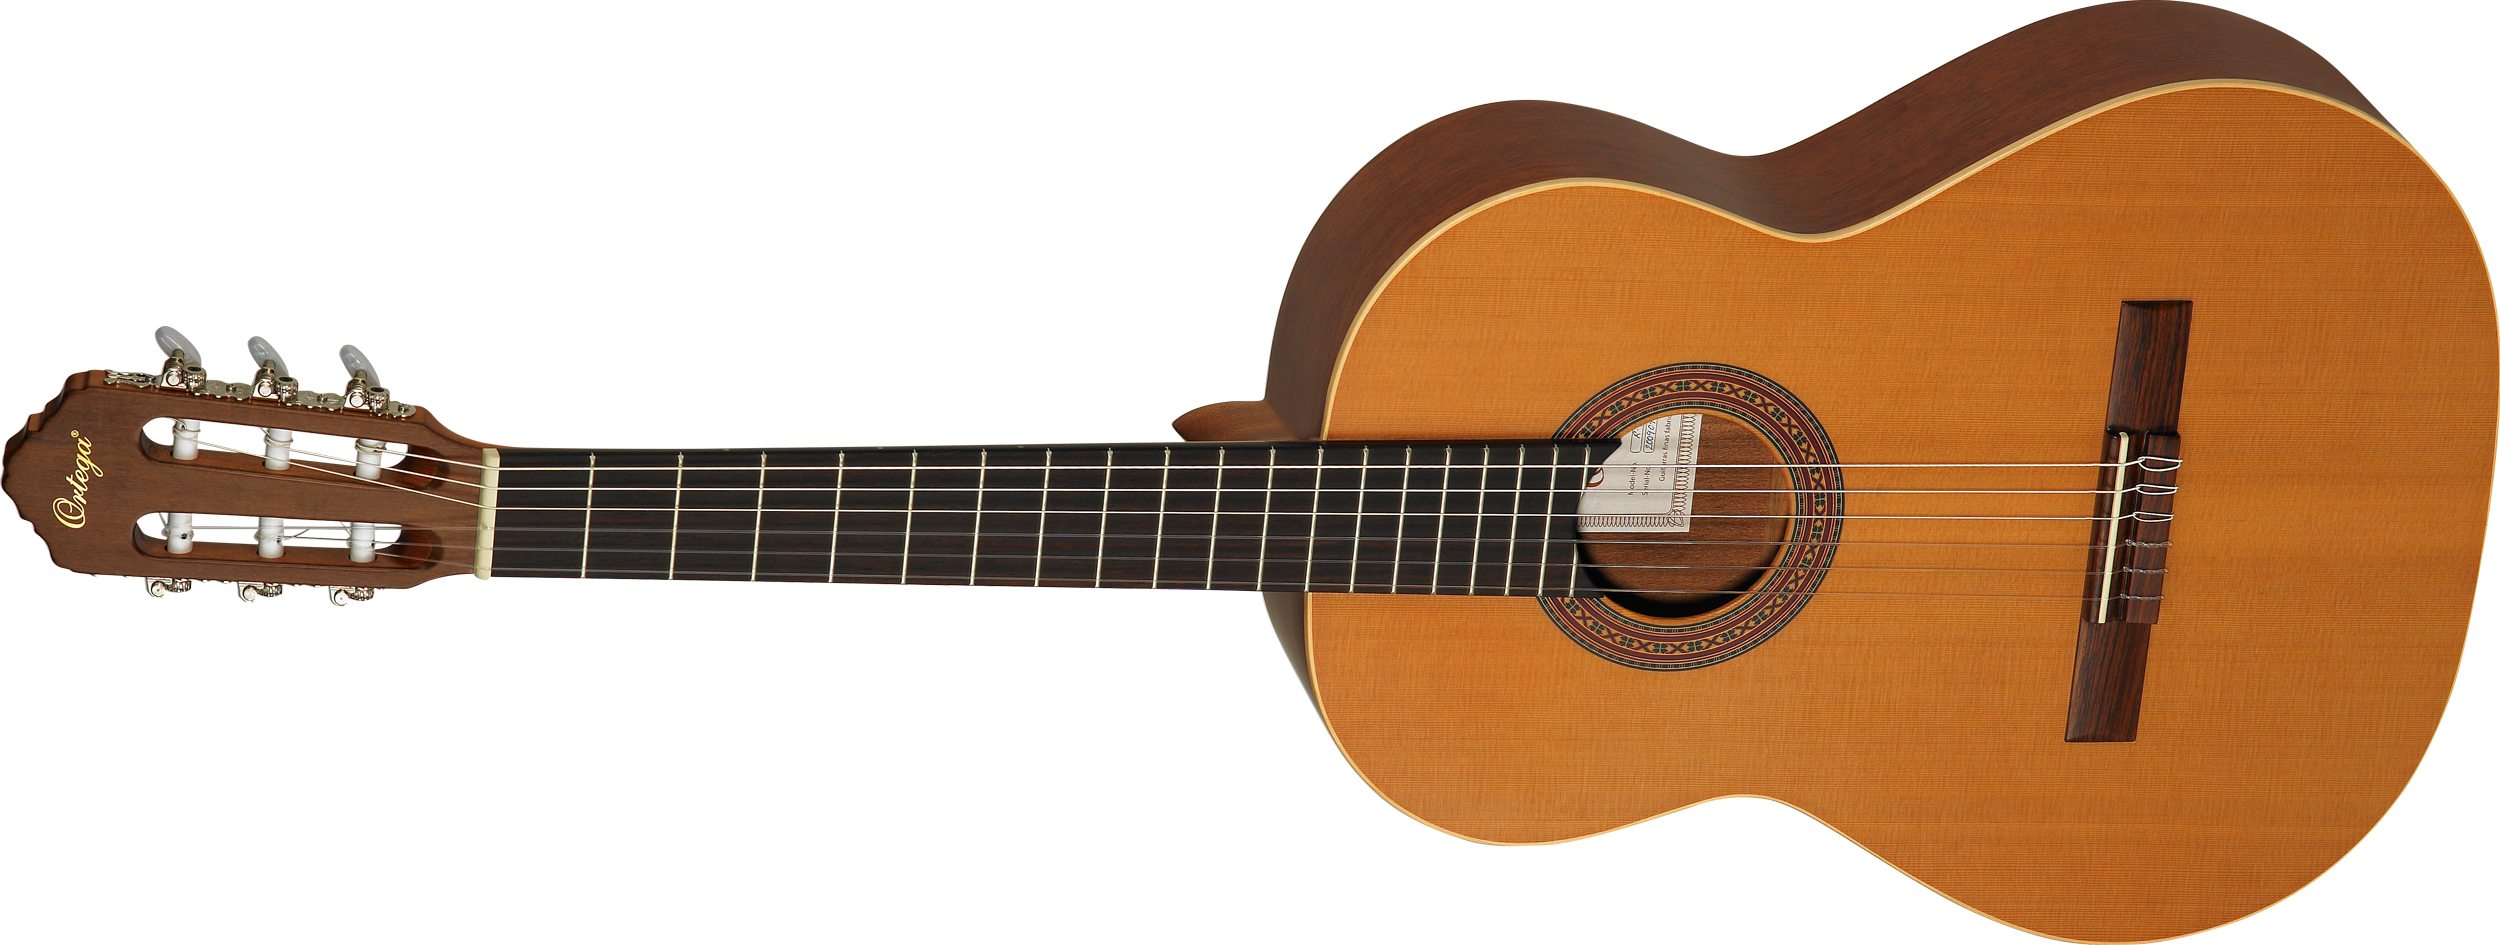 Taylor String Classical Instruments Guitar Guitars Acoustic Clipart